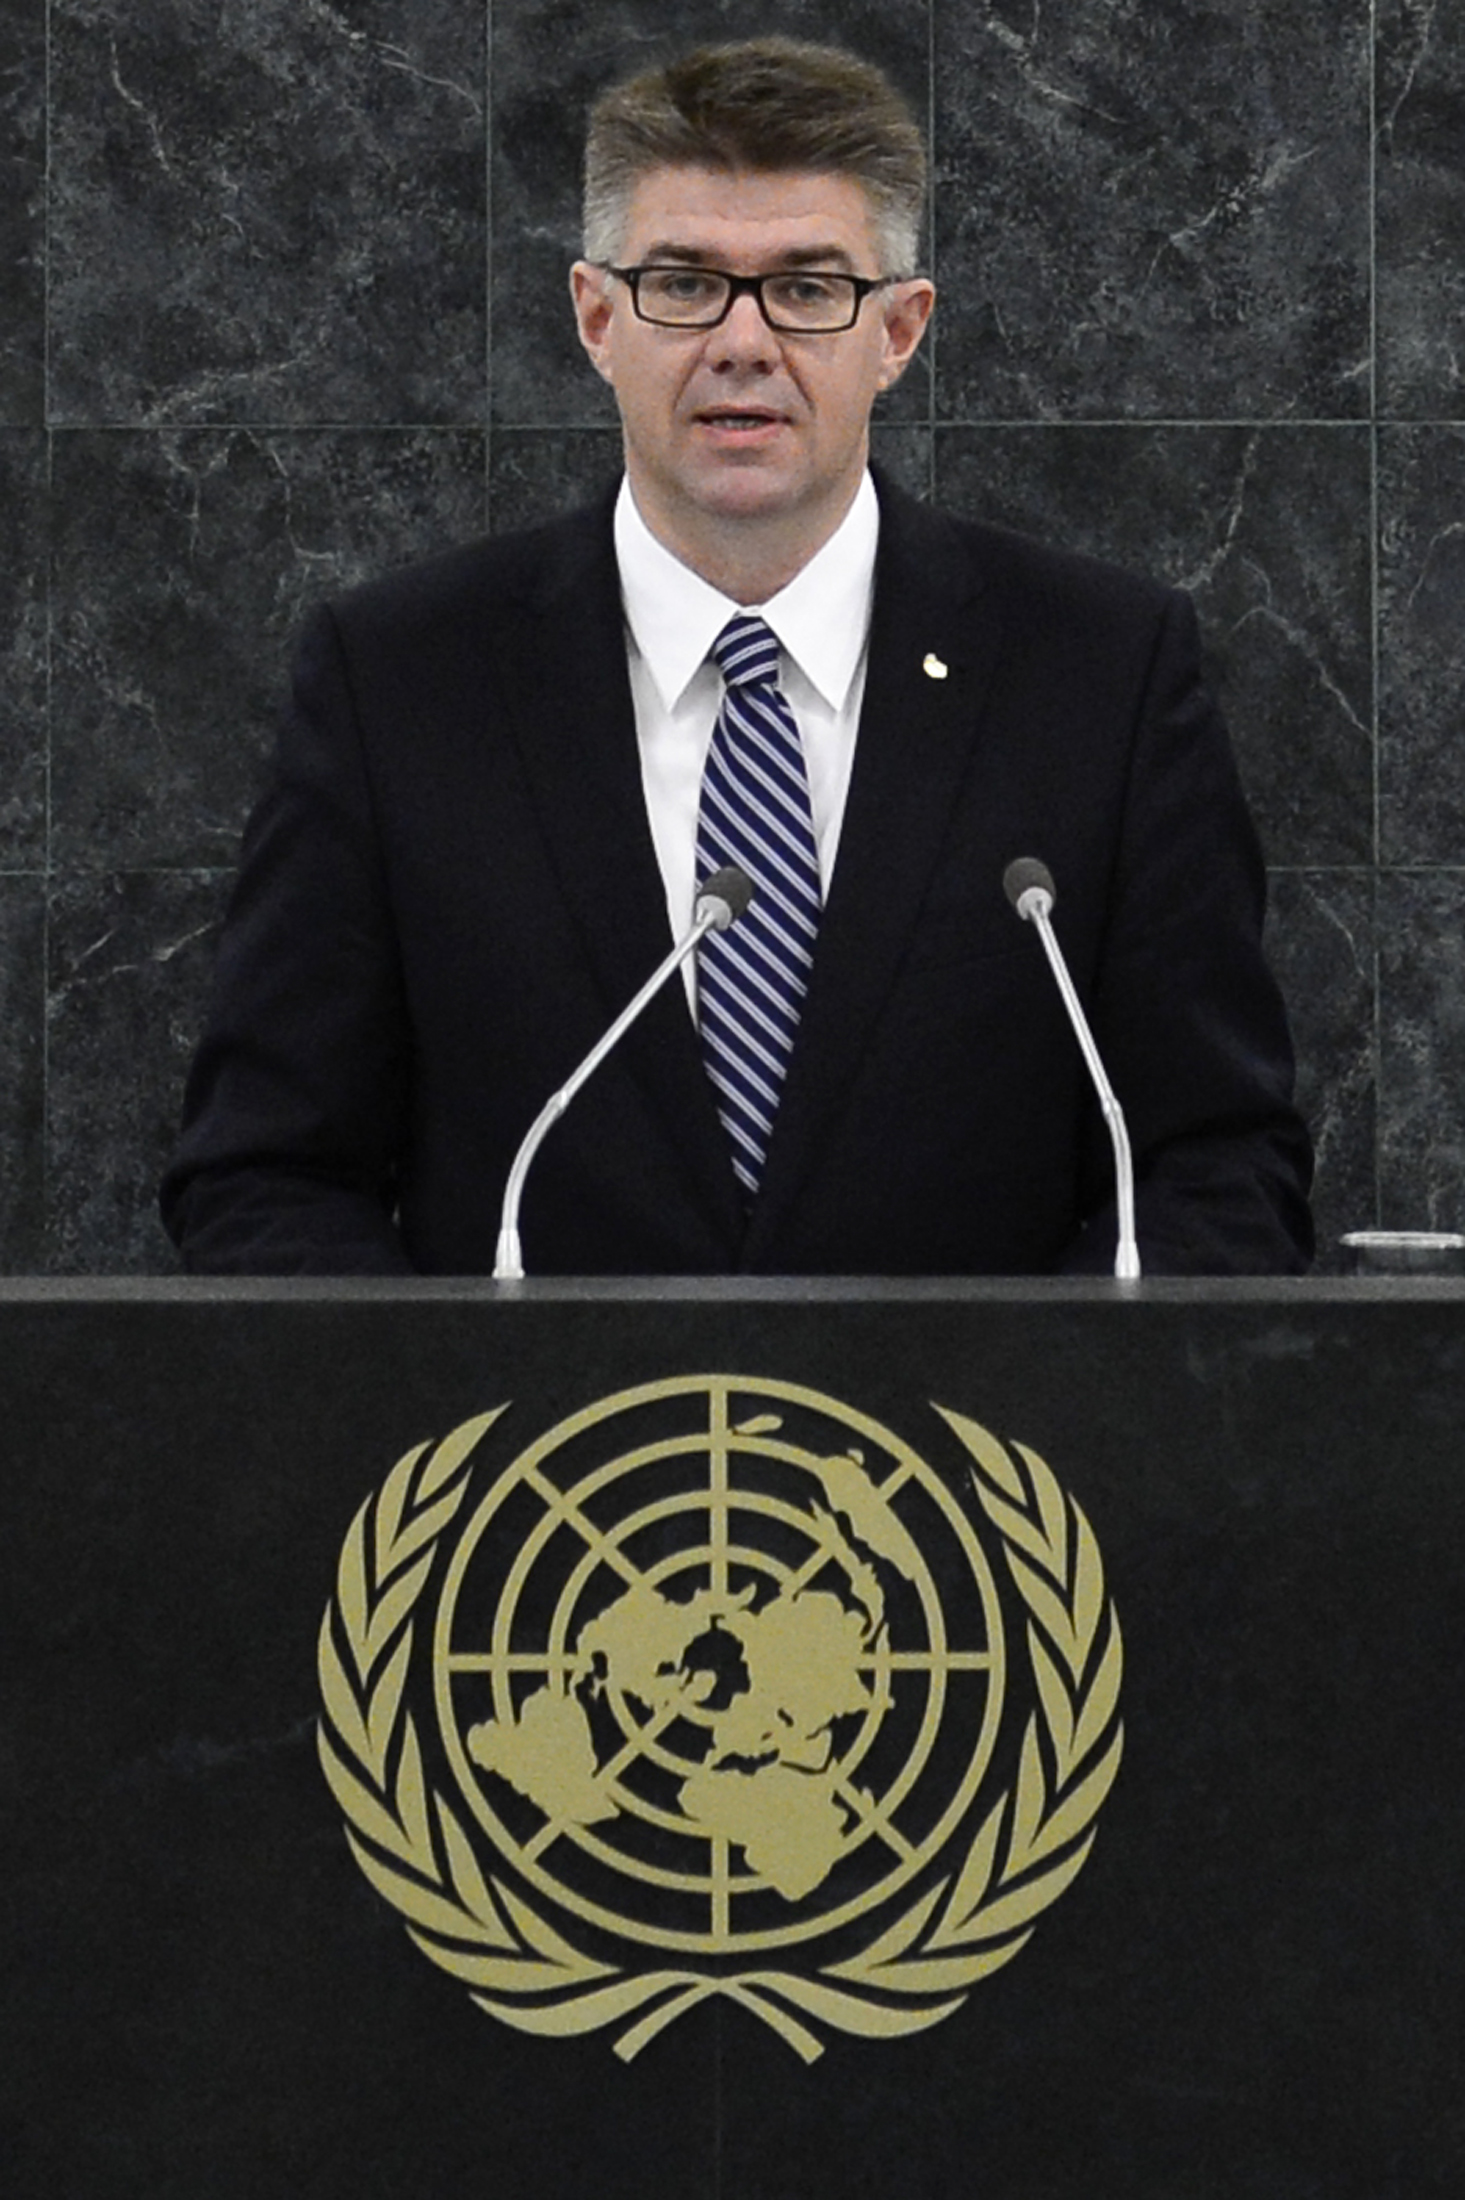 Gunnar Bragi Sveinsson, minister for foreign affairs of Iceland, addresses the 68th session of the United Nations General Assembly in New York Sept. 30, 2013. (Adrees Latif—Reuters)